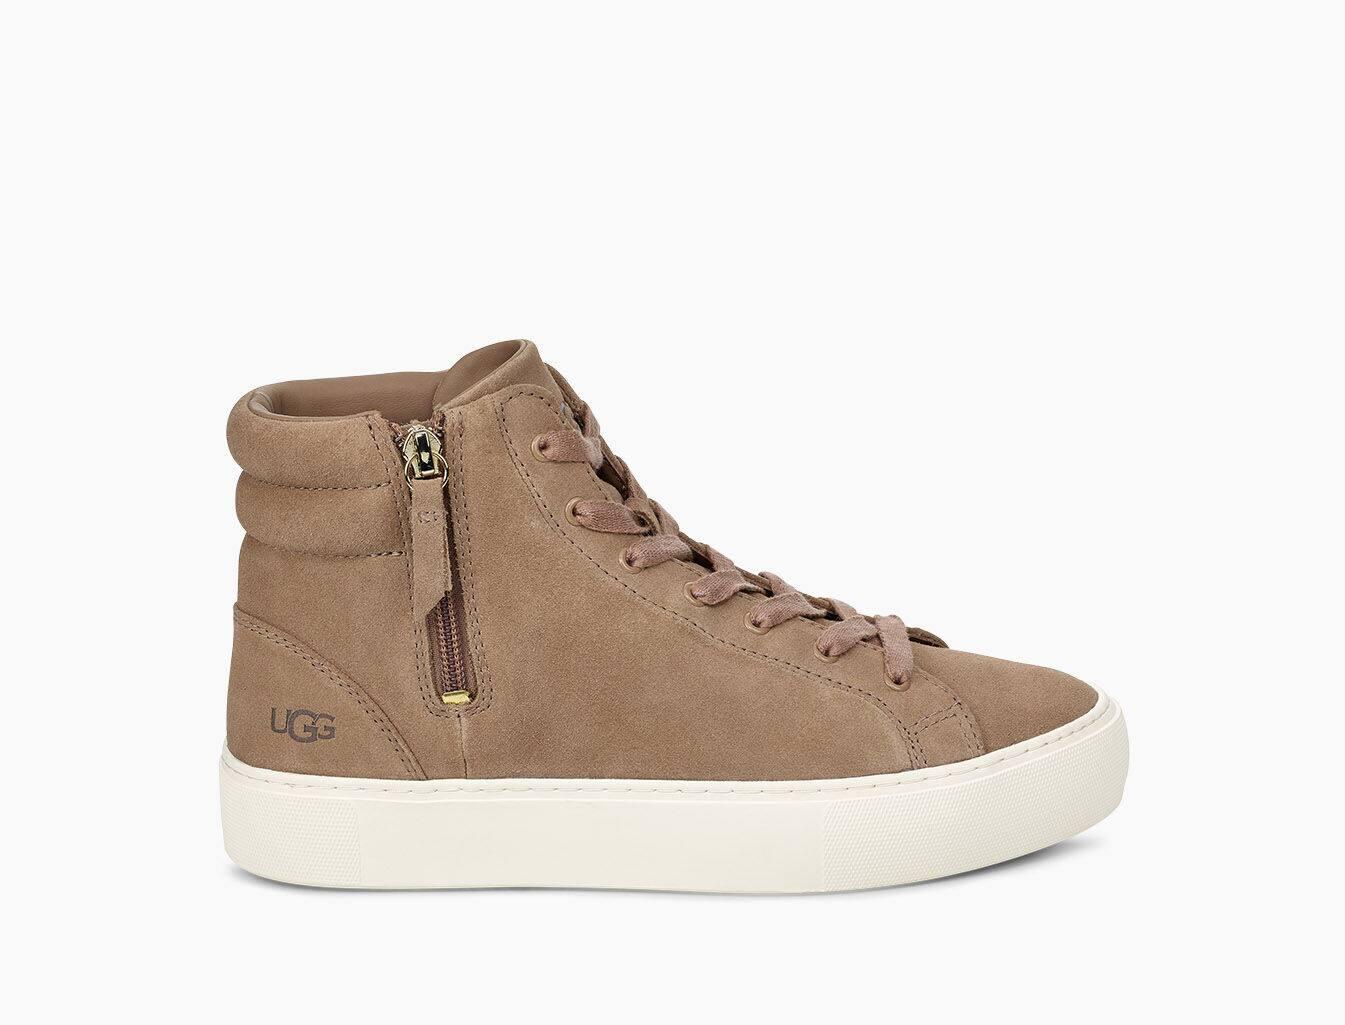 UGG Olli Leather High-top Sneakers in Brown - Save 54% - Lyst